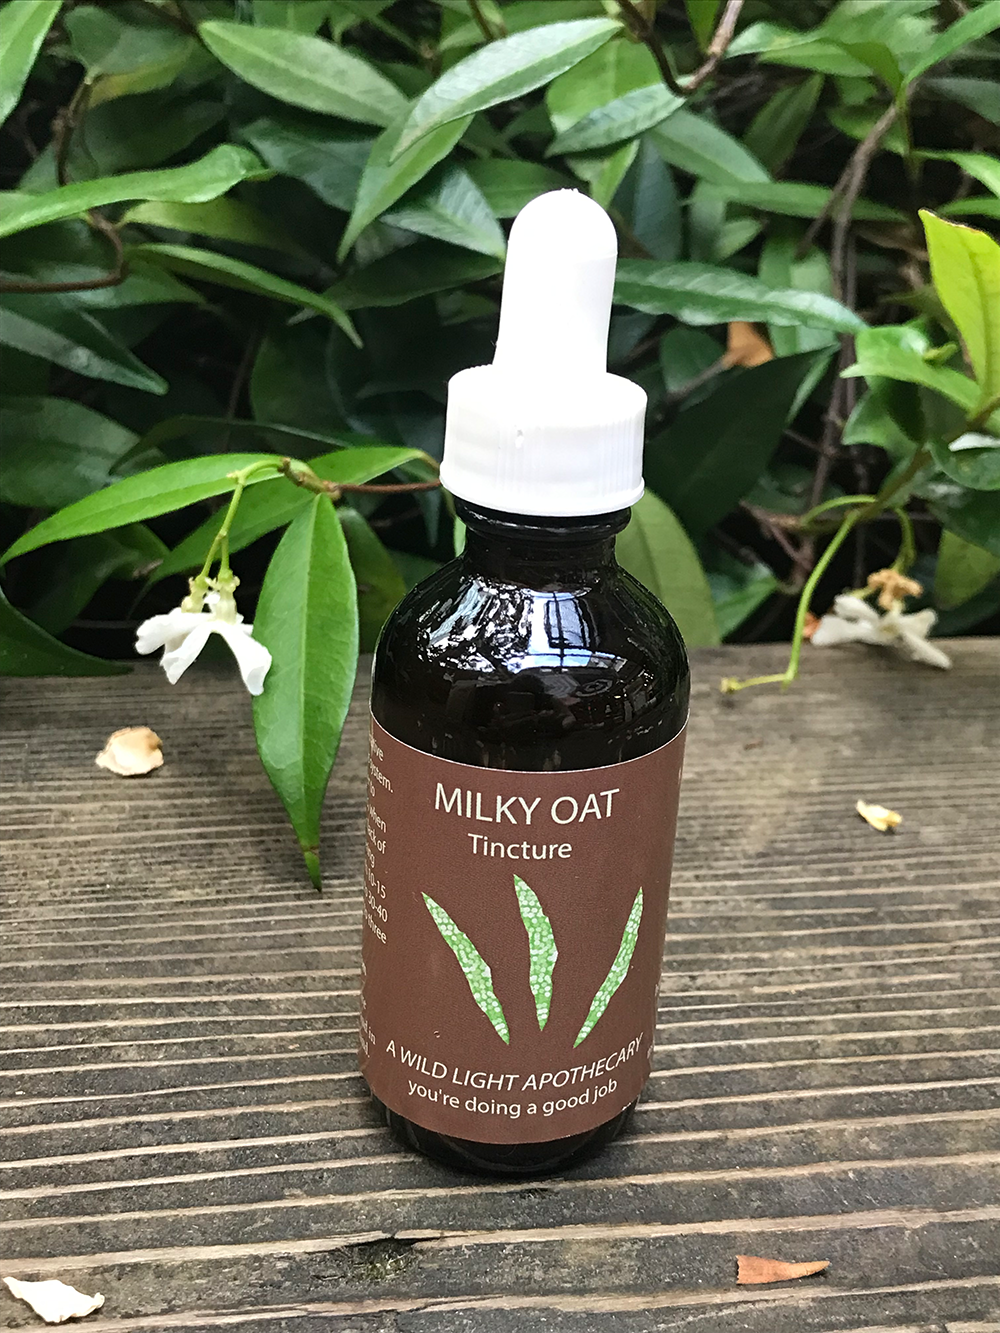 Milky Oat by a Wild Light Apothecary